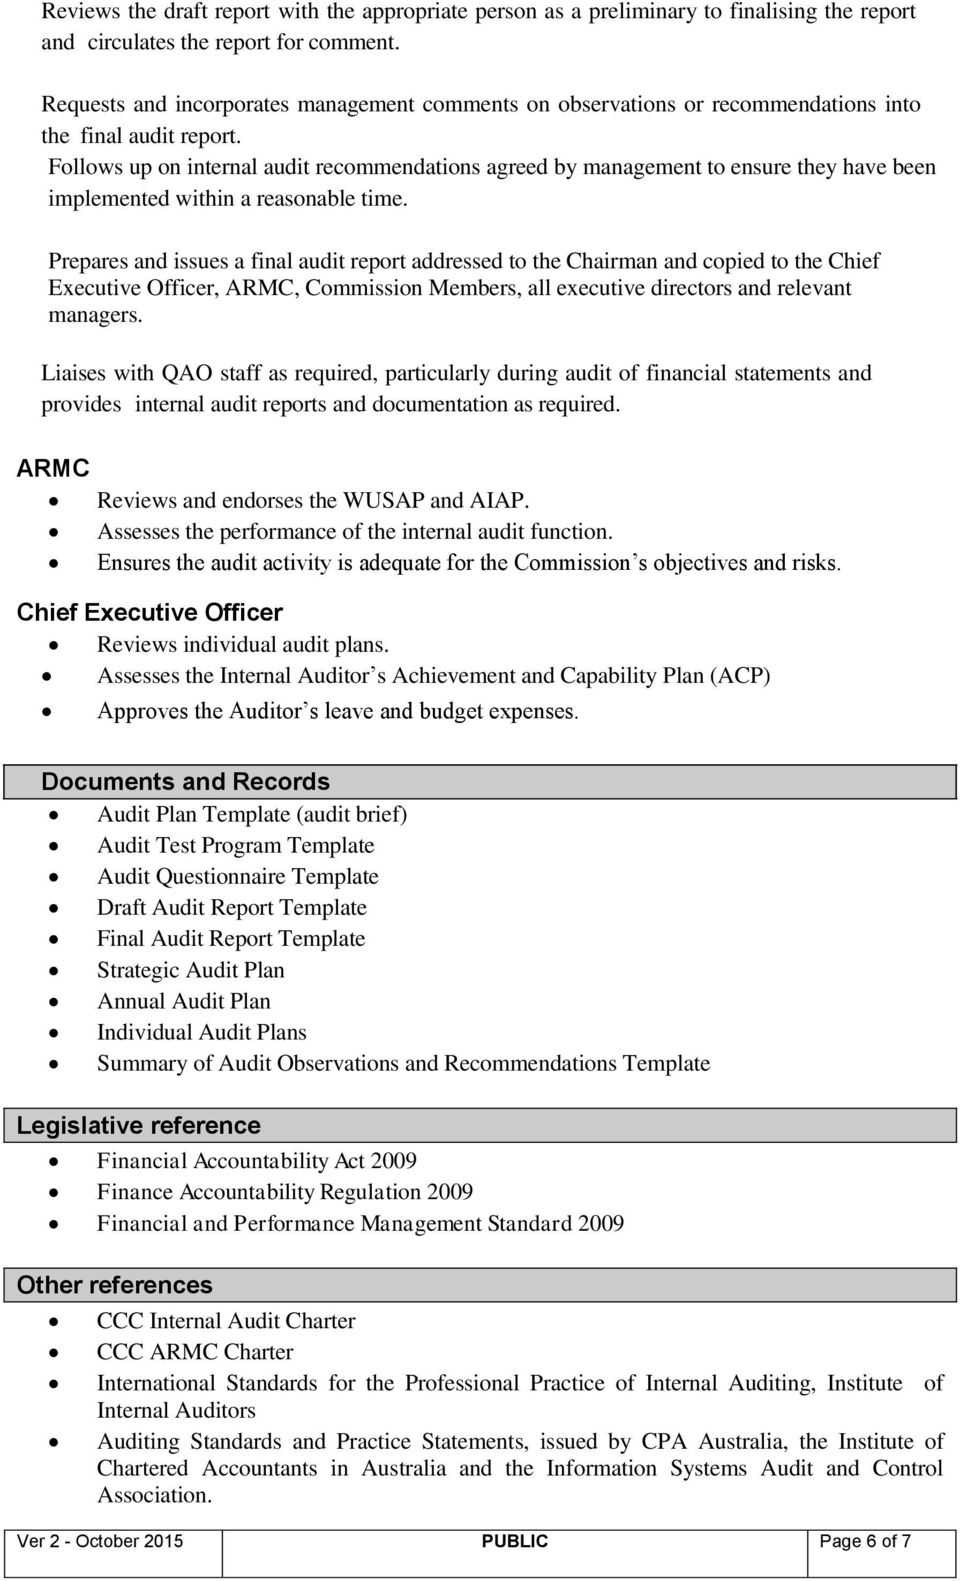 Sample Internal Audit Report Executive Summary Intended For Evaluation Summary Report Template